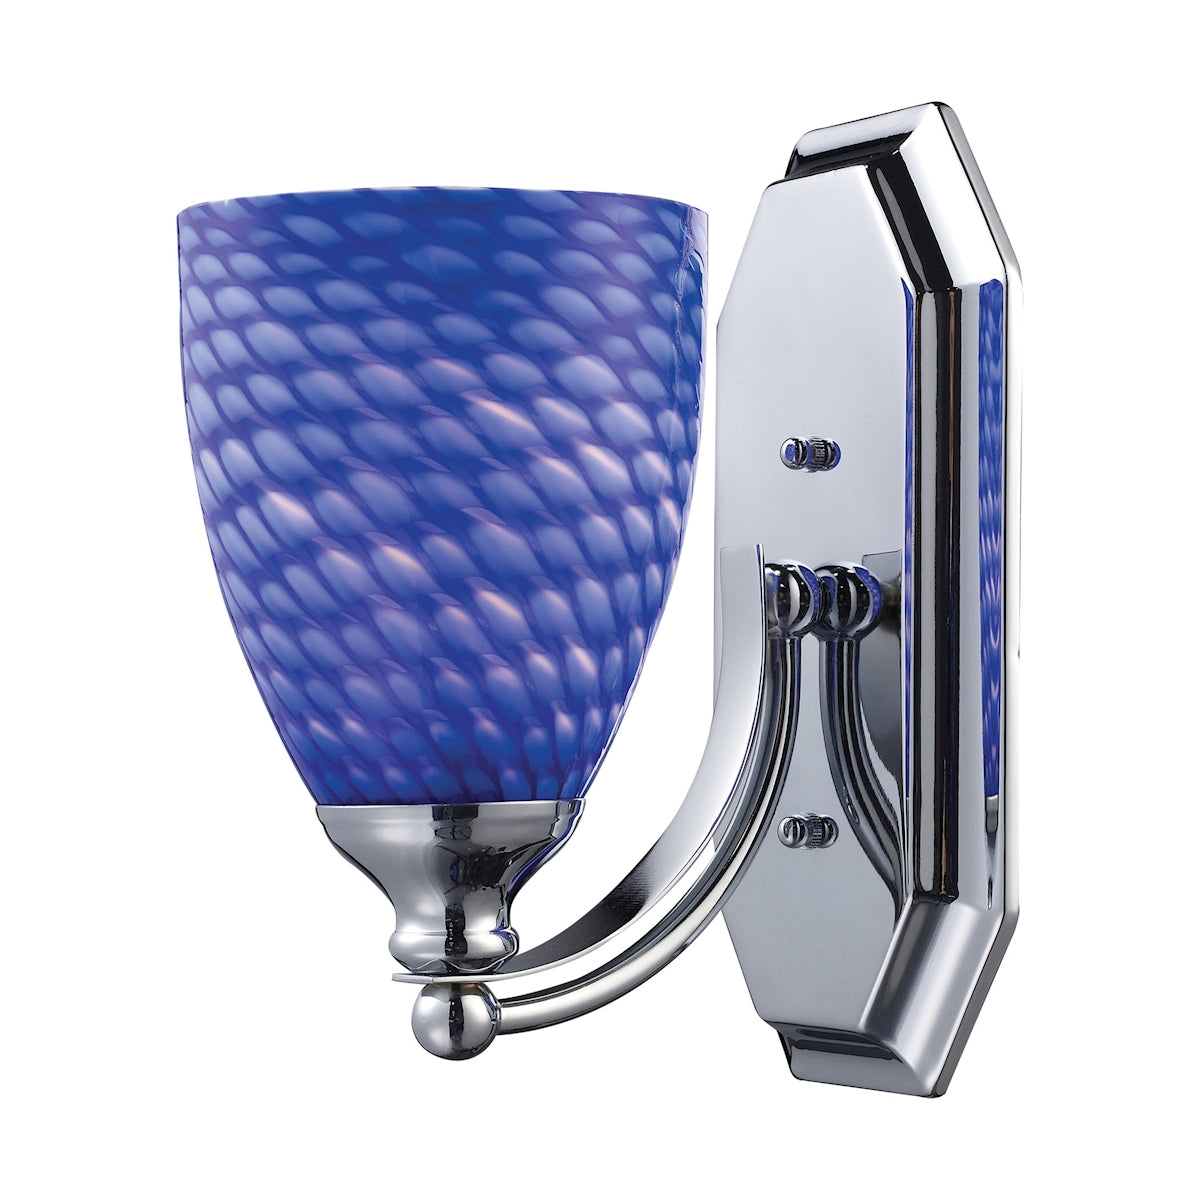 ELK Lighting 570-1C-S - Mix and Match Vanity 5" Wide 1-Light Vanity Light in Chrome with Sapphire Gl